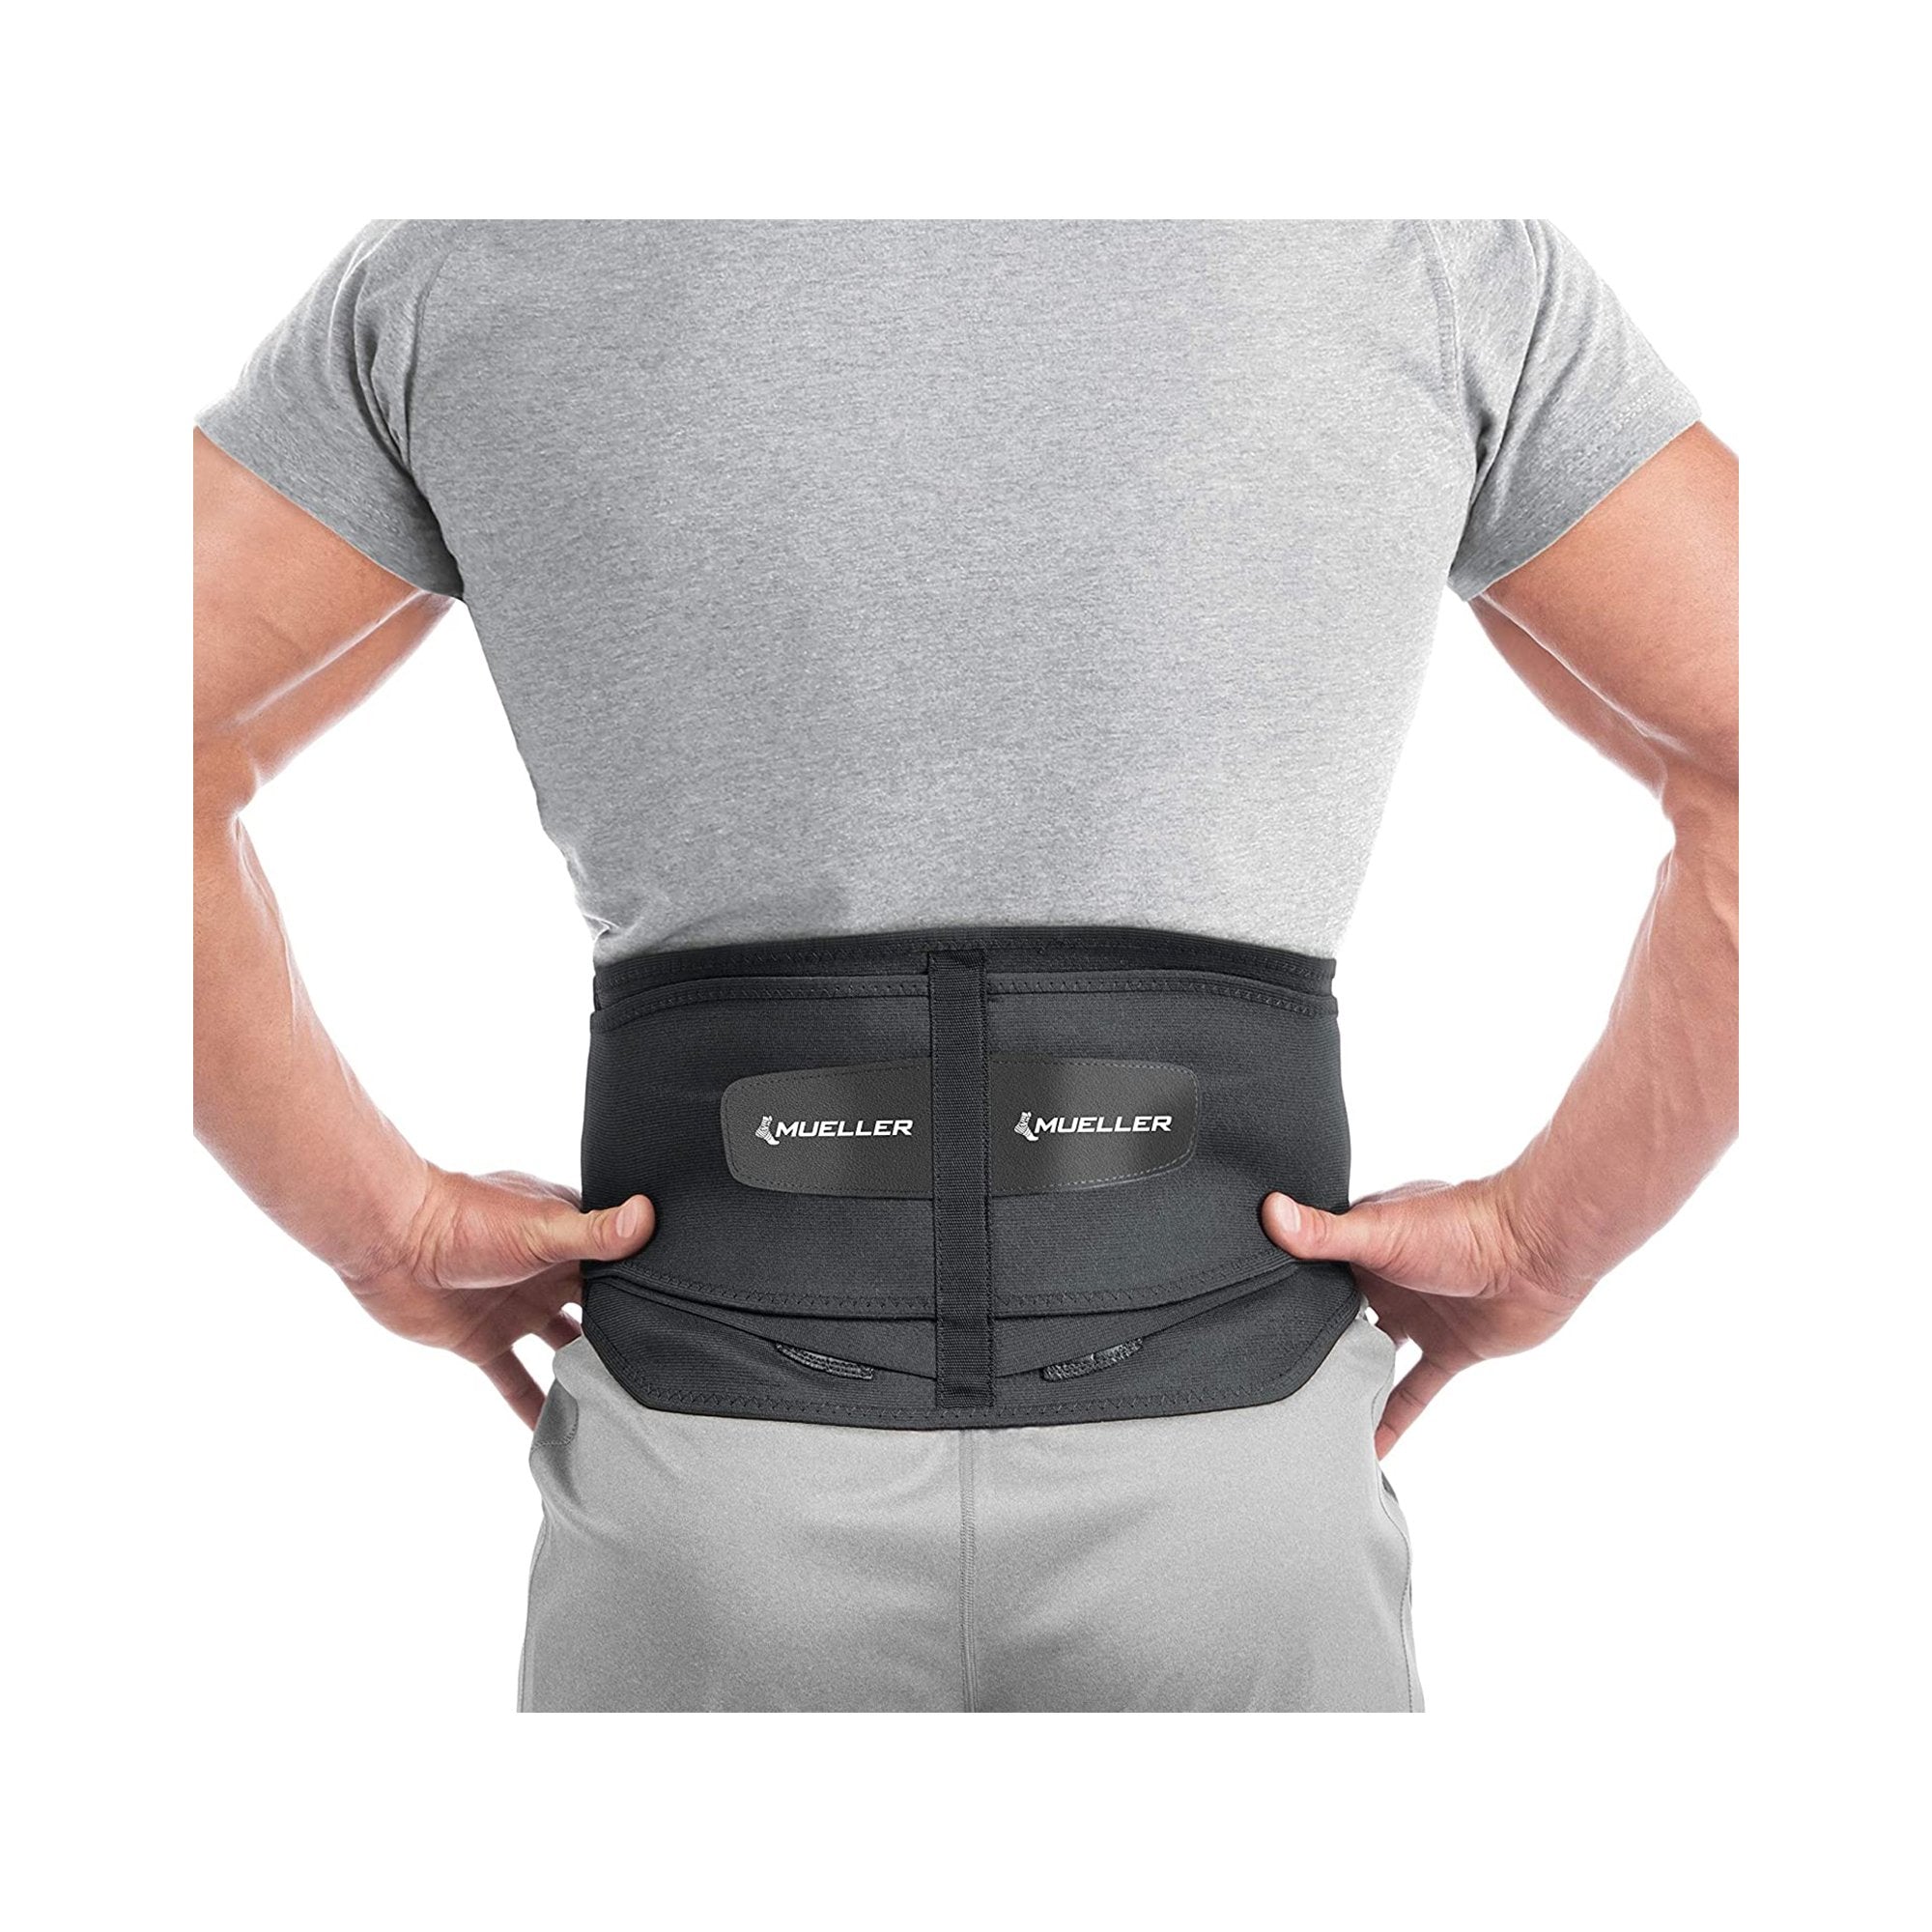 Back Brace Mueller® One Size Fits Most Hook and Loop Closure 28 to 50 Inch Waist Circumference 9 Inch Height Adult